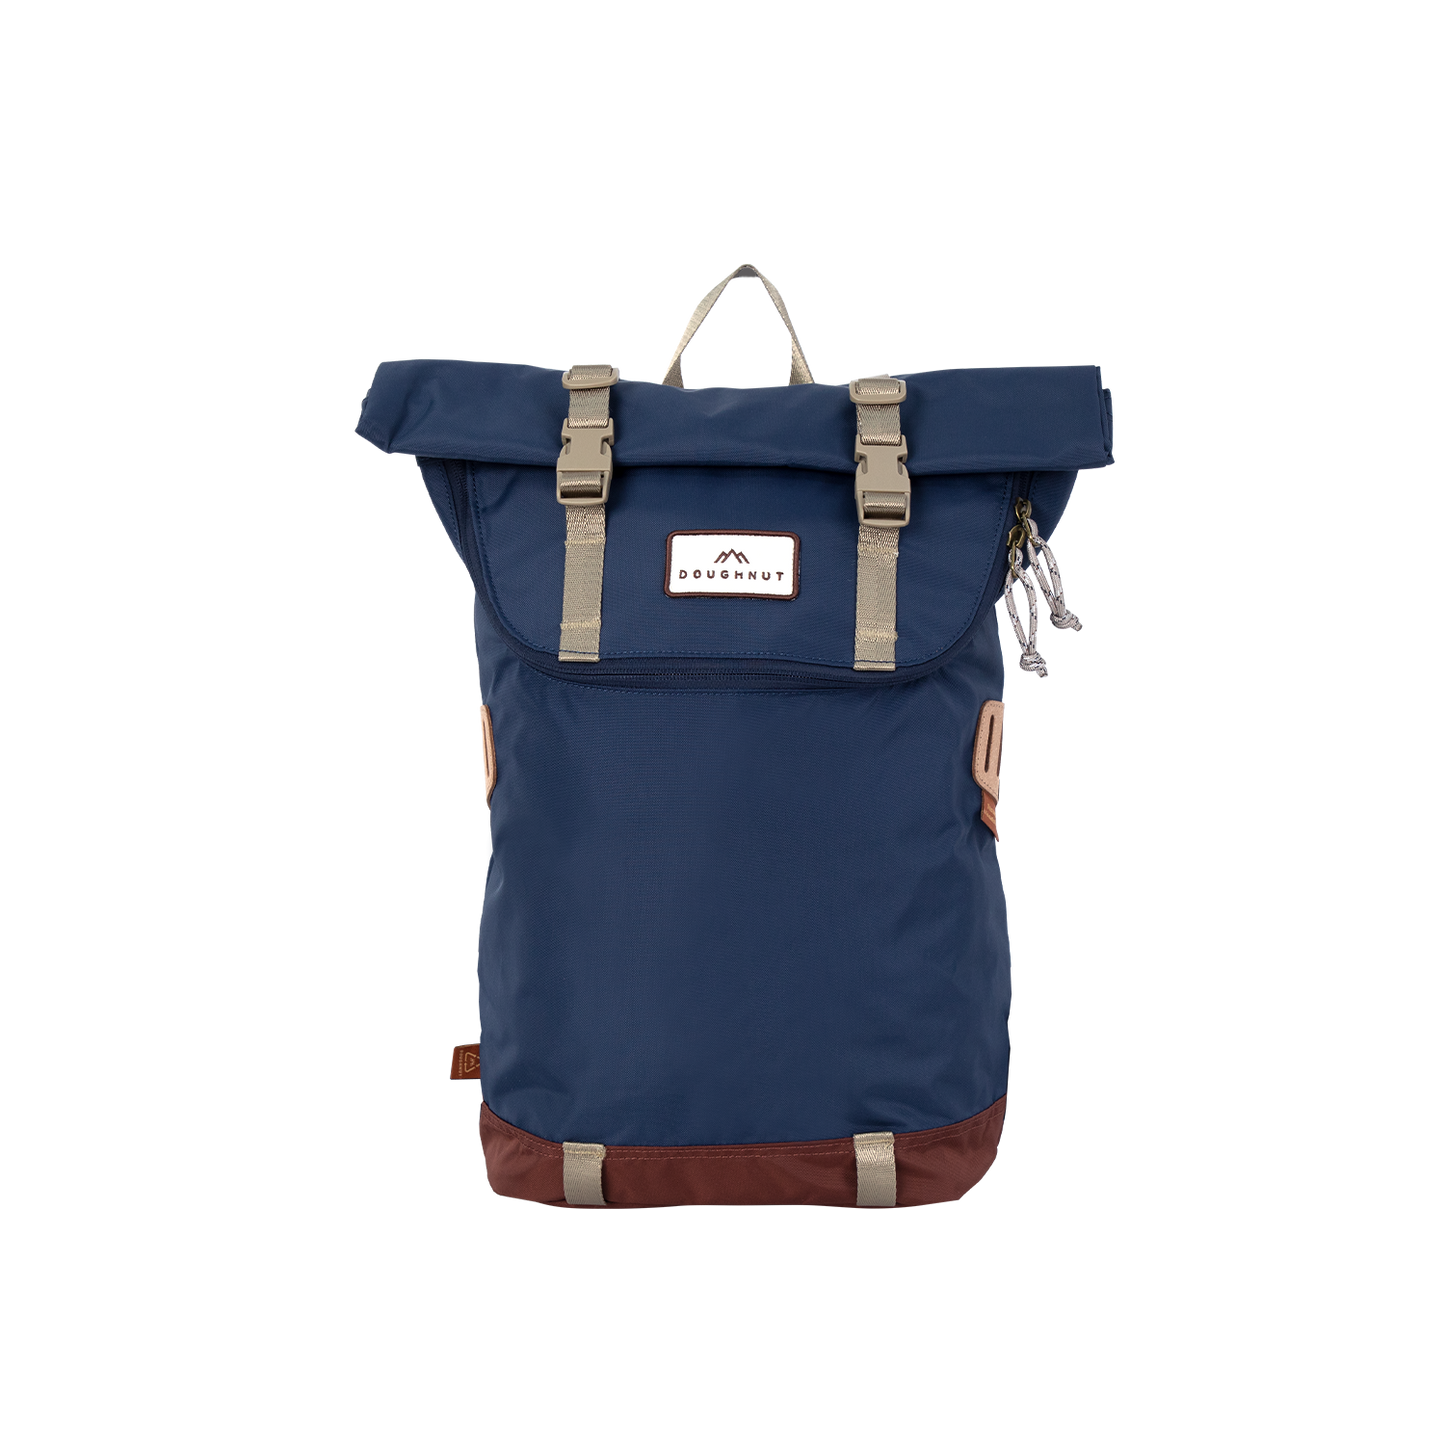 Christopher Small Jungle II Series Backpack